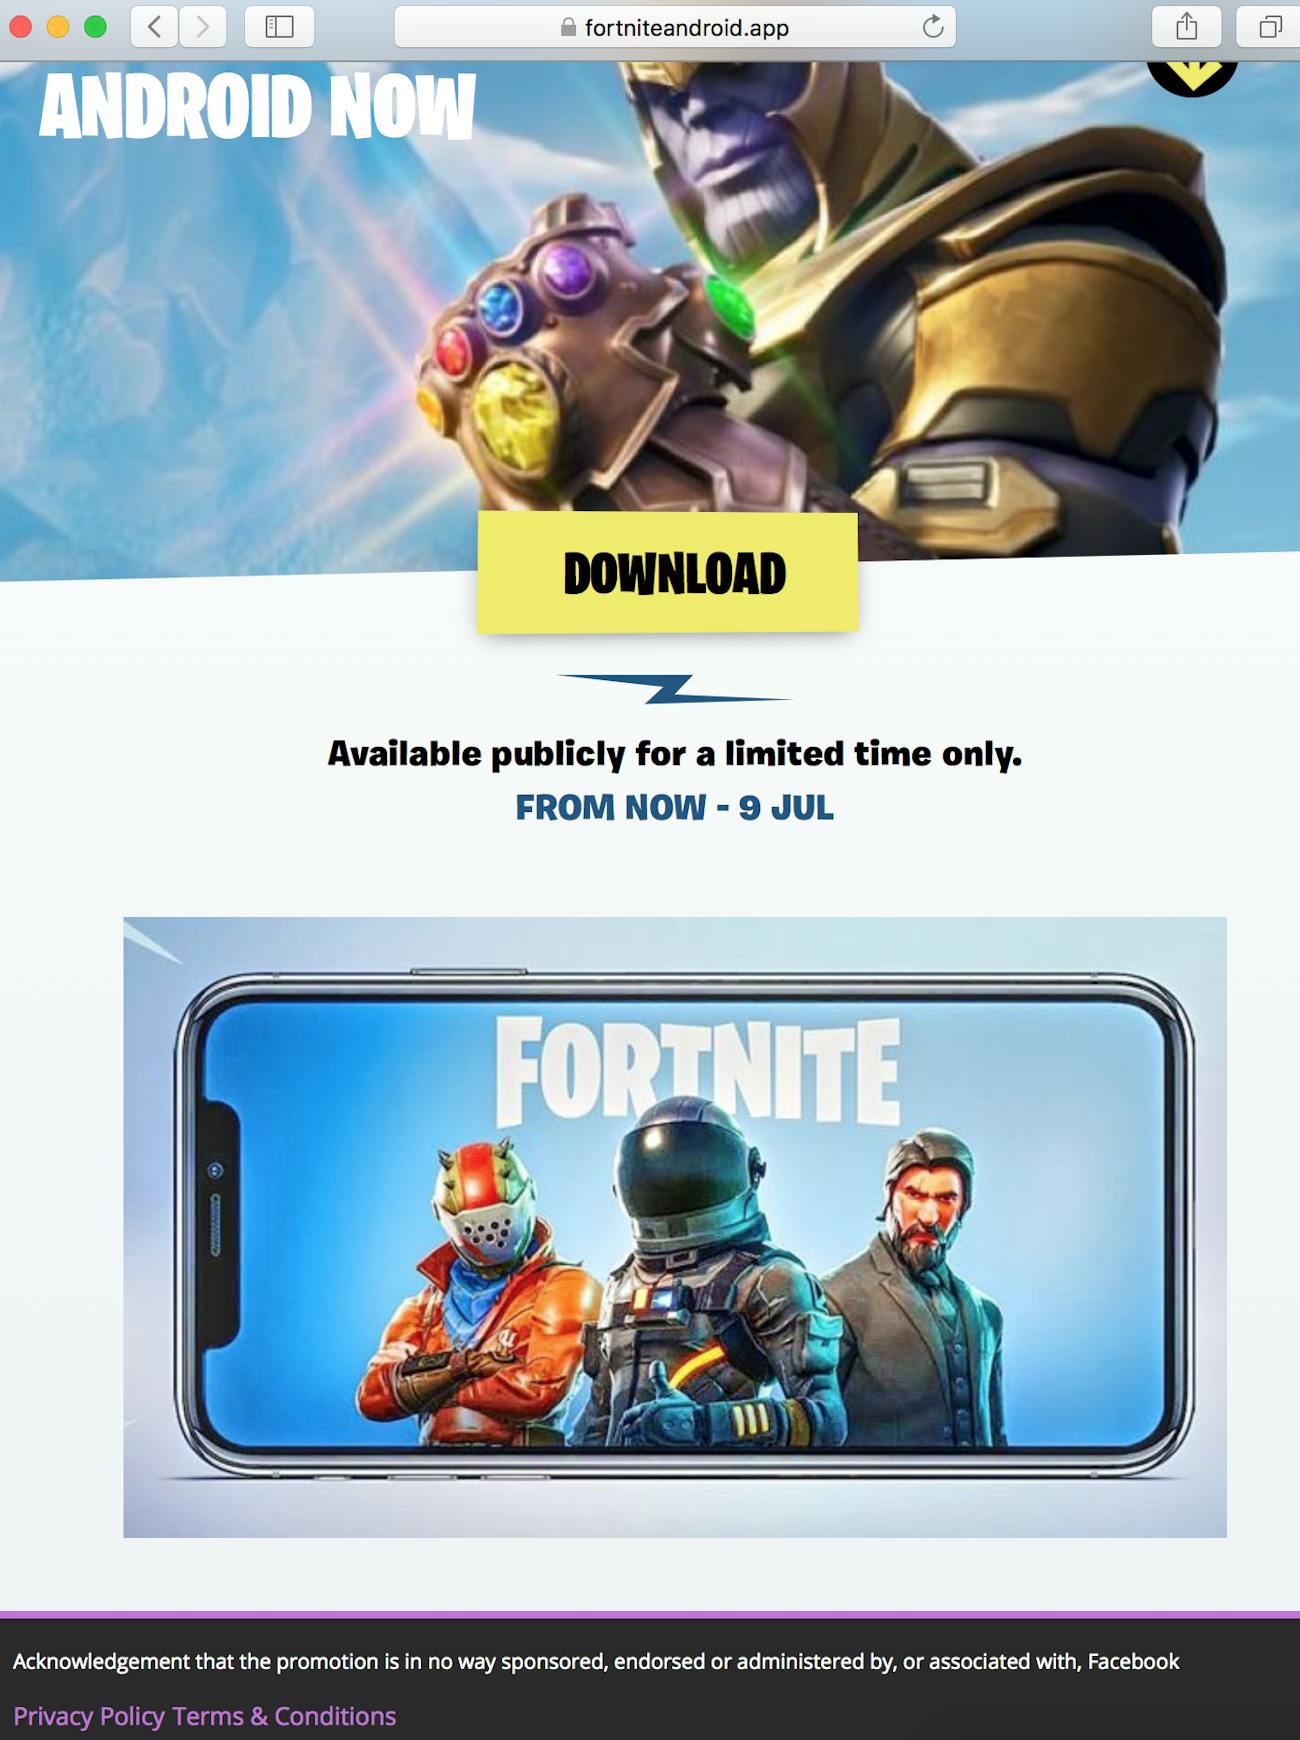 fake fortnite android site - fortnite android app release date